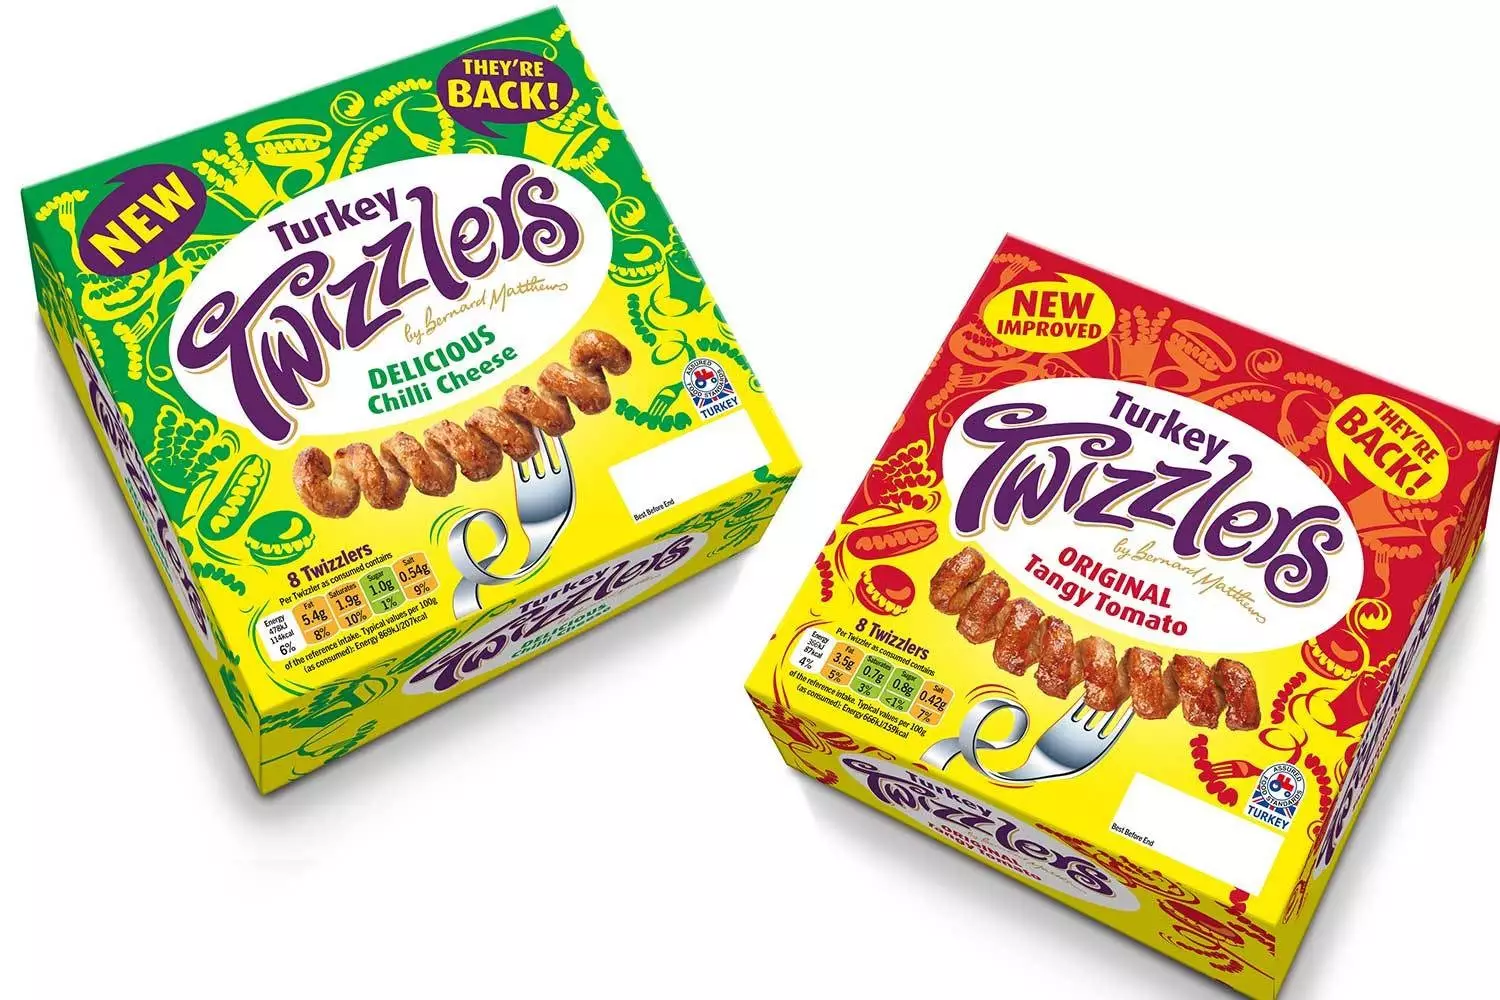 Iceland will restock on Turkey Twizzlers on 7 September.